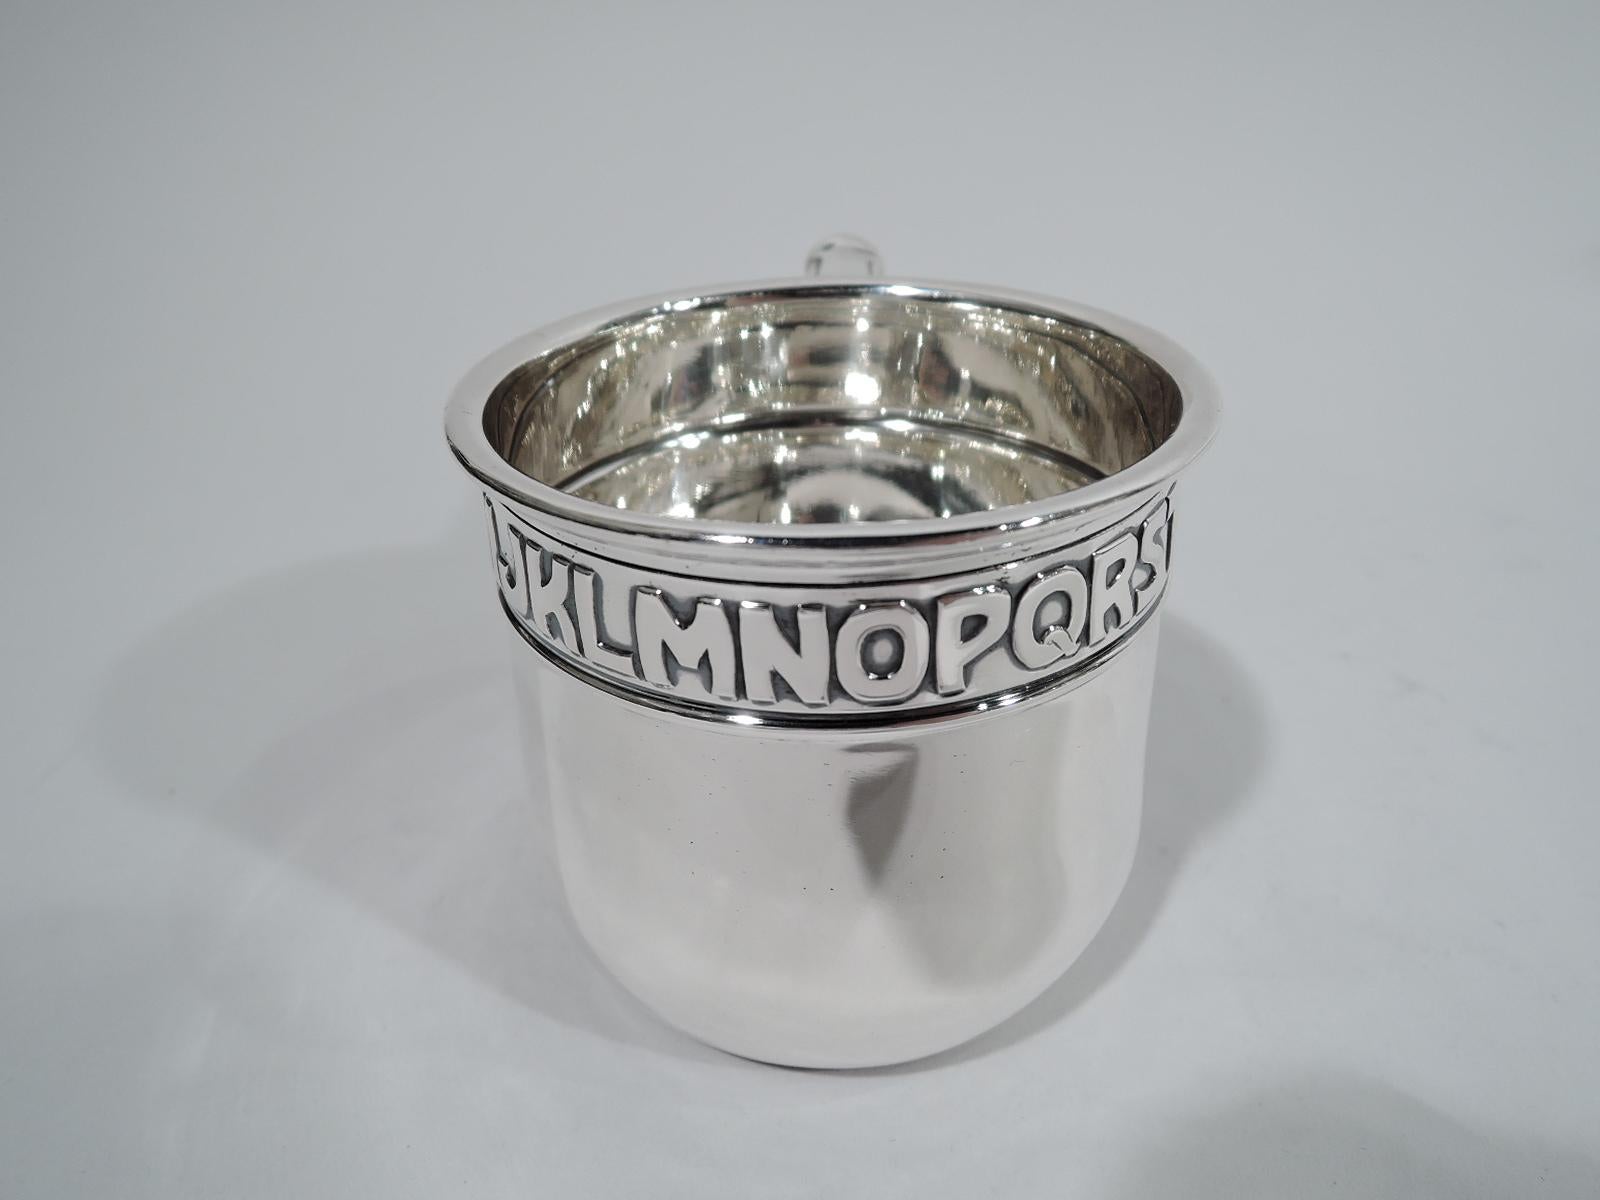 Edwardian sterling silver baby cup. Gently upward tapering sides and capped- and leaf-mounted scroll bracket handle. Acid-etched ABC border wraparound the top. All the letters in the alphabet for spelling out the name of someone extra special. Fully